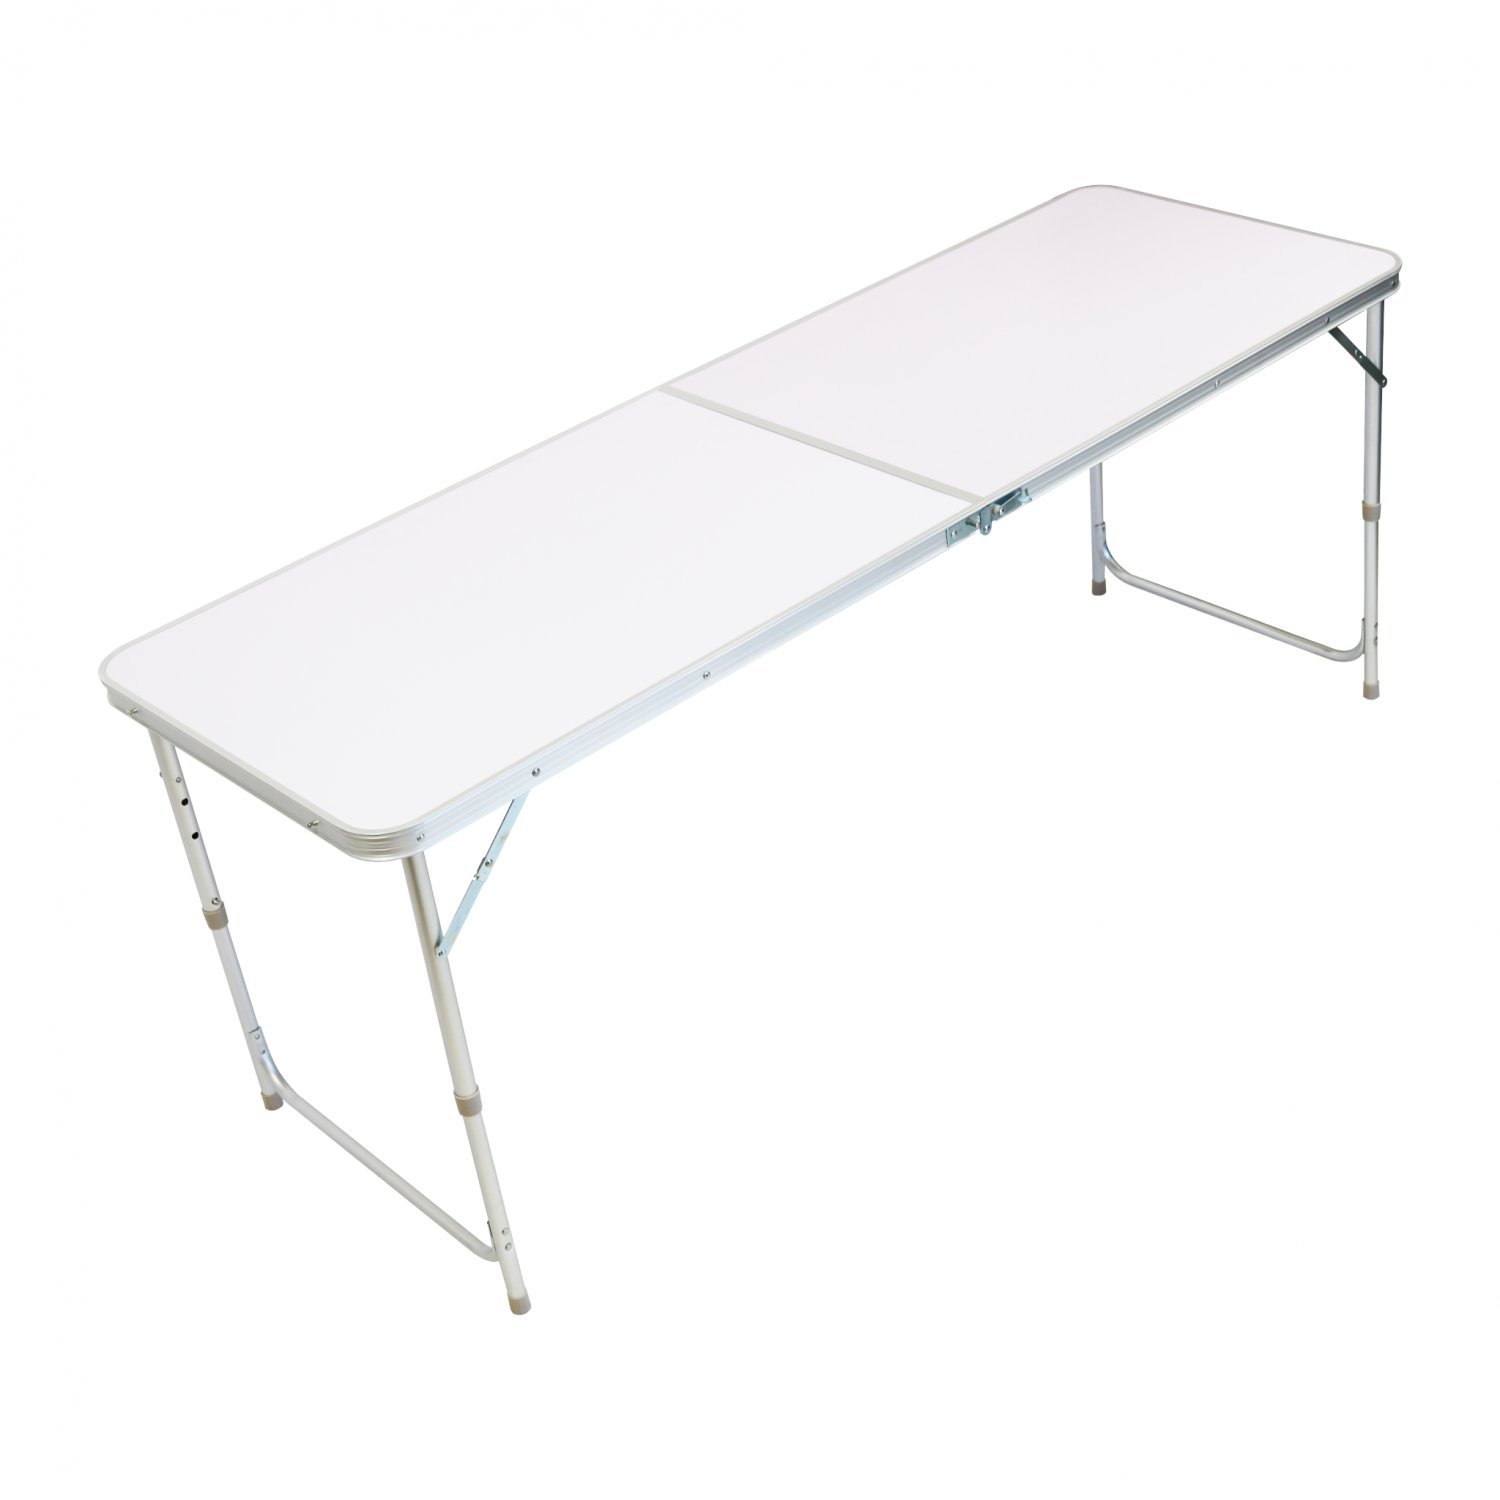 4FT Heavy Duty Folding Table Portable Camping Picnic Garden Party BBQ Outdoor UK 